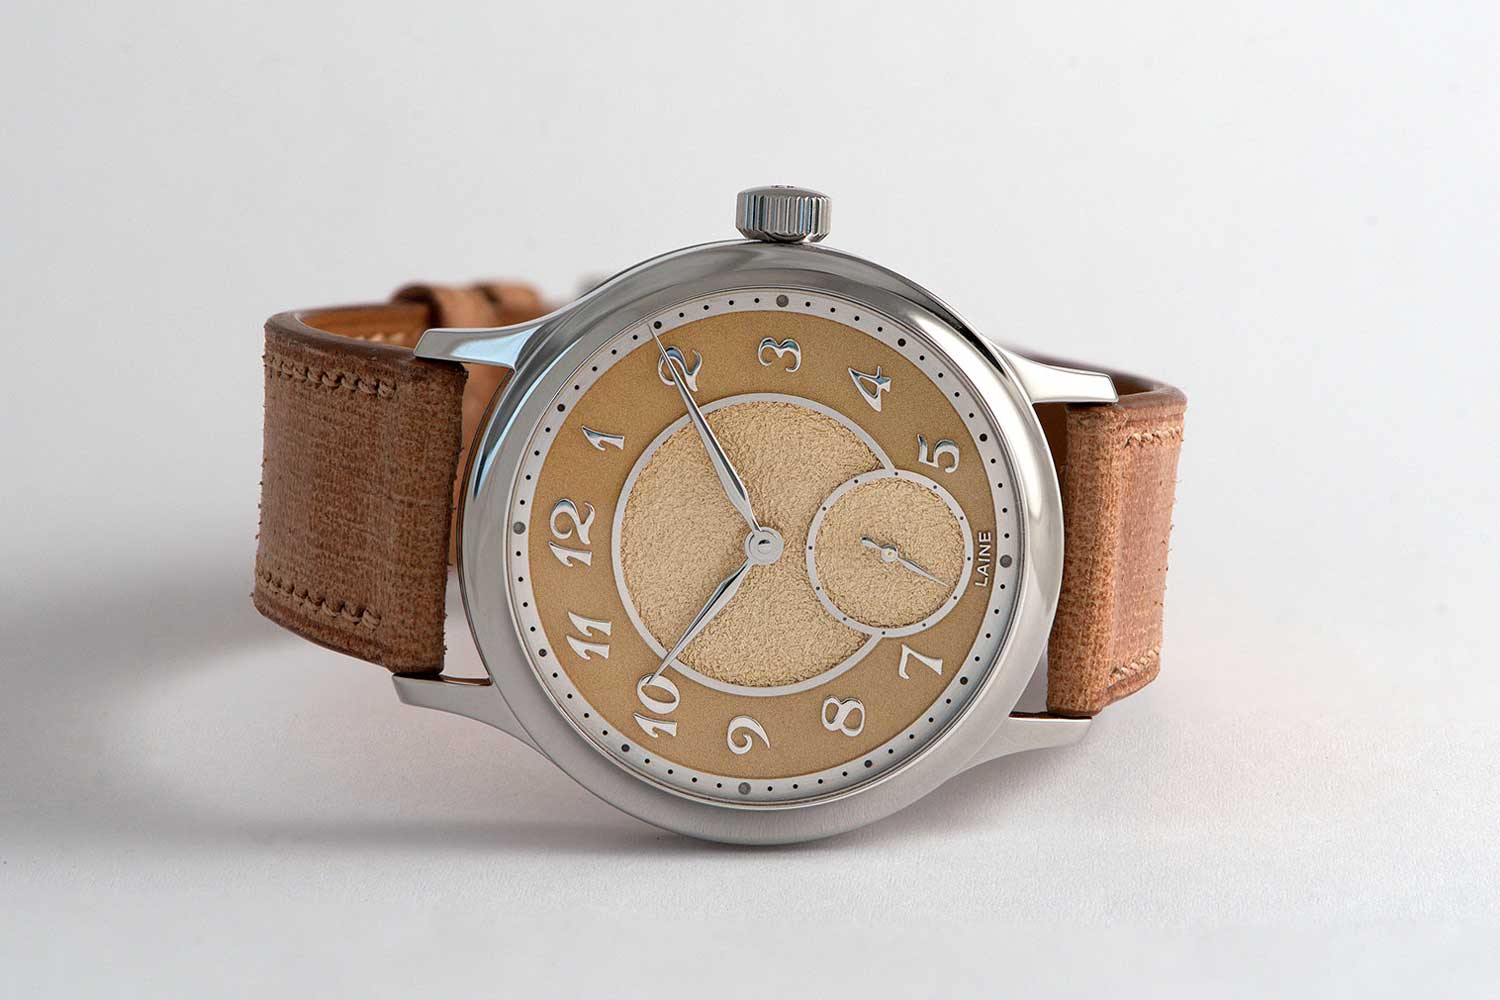 The Laine V38 based on the Vaucher 5401 micro-rotor automatic movement.